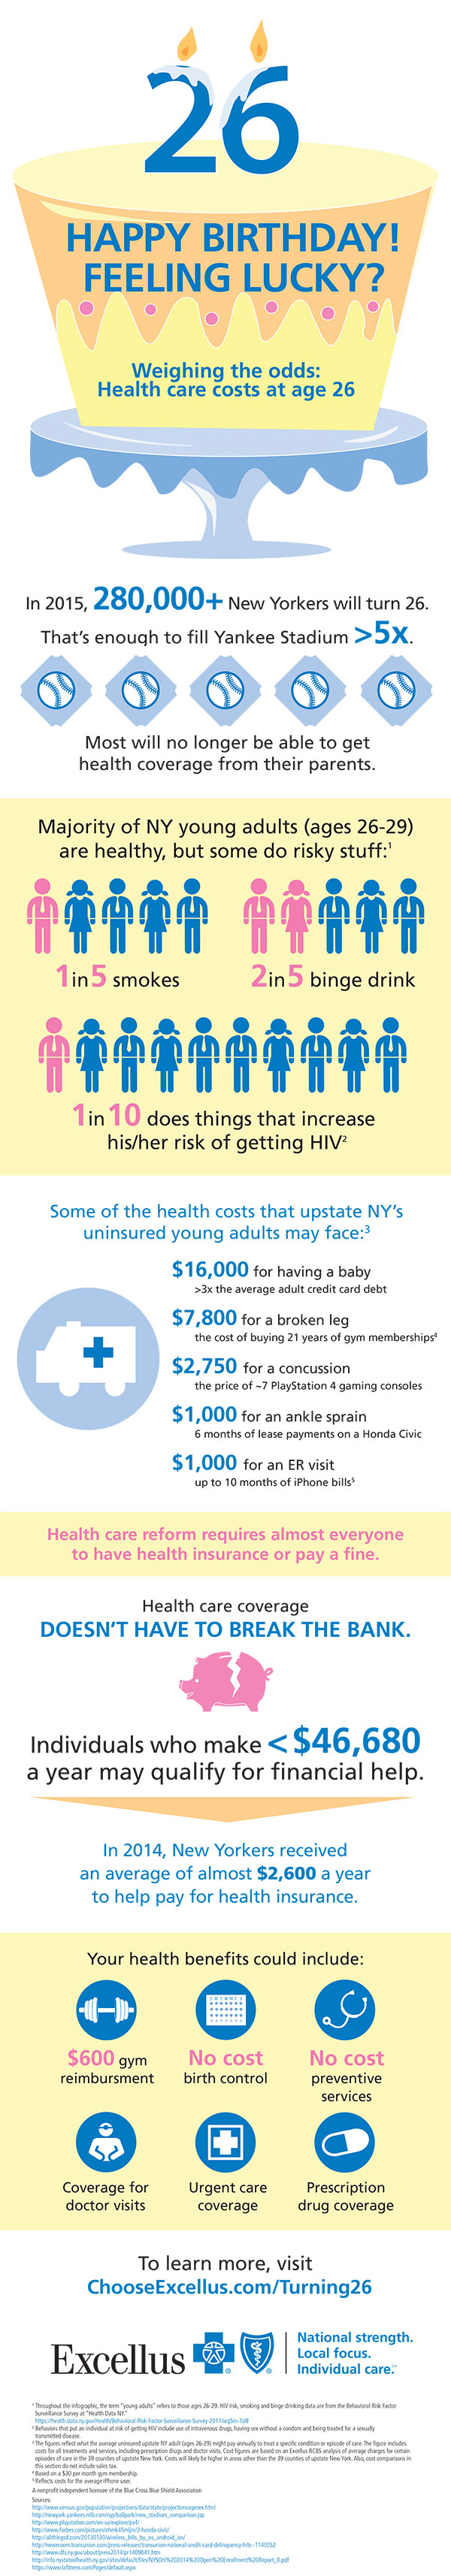 If you break a leg, you could face more than $7,000 in medical bills. Or, suffer a concussion, and you could face $3,000 in costs. Uninsured young adults in upstate New York face a variety of unexpected medical costs if they get sick or hurt<br /><br />Go to <a href='http://www.chooseexcellus.com/Turning26'>ChooseExcellus.com/Turning26</a> to learn more.